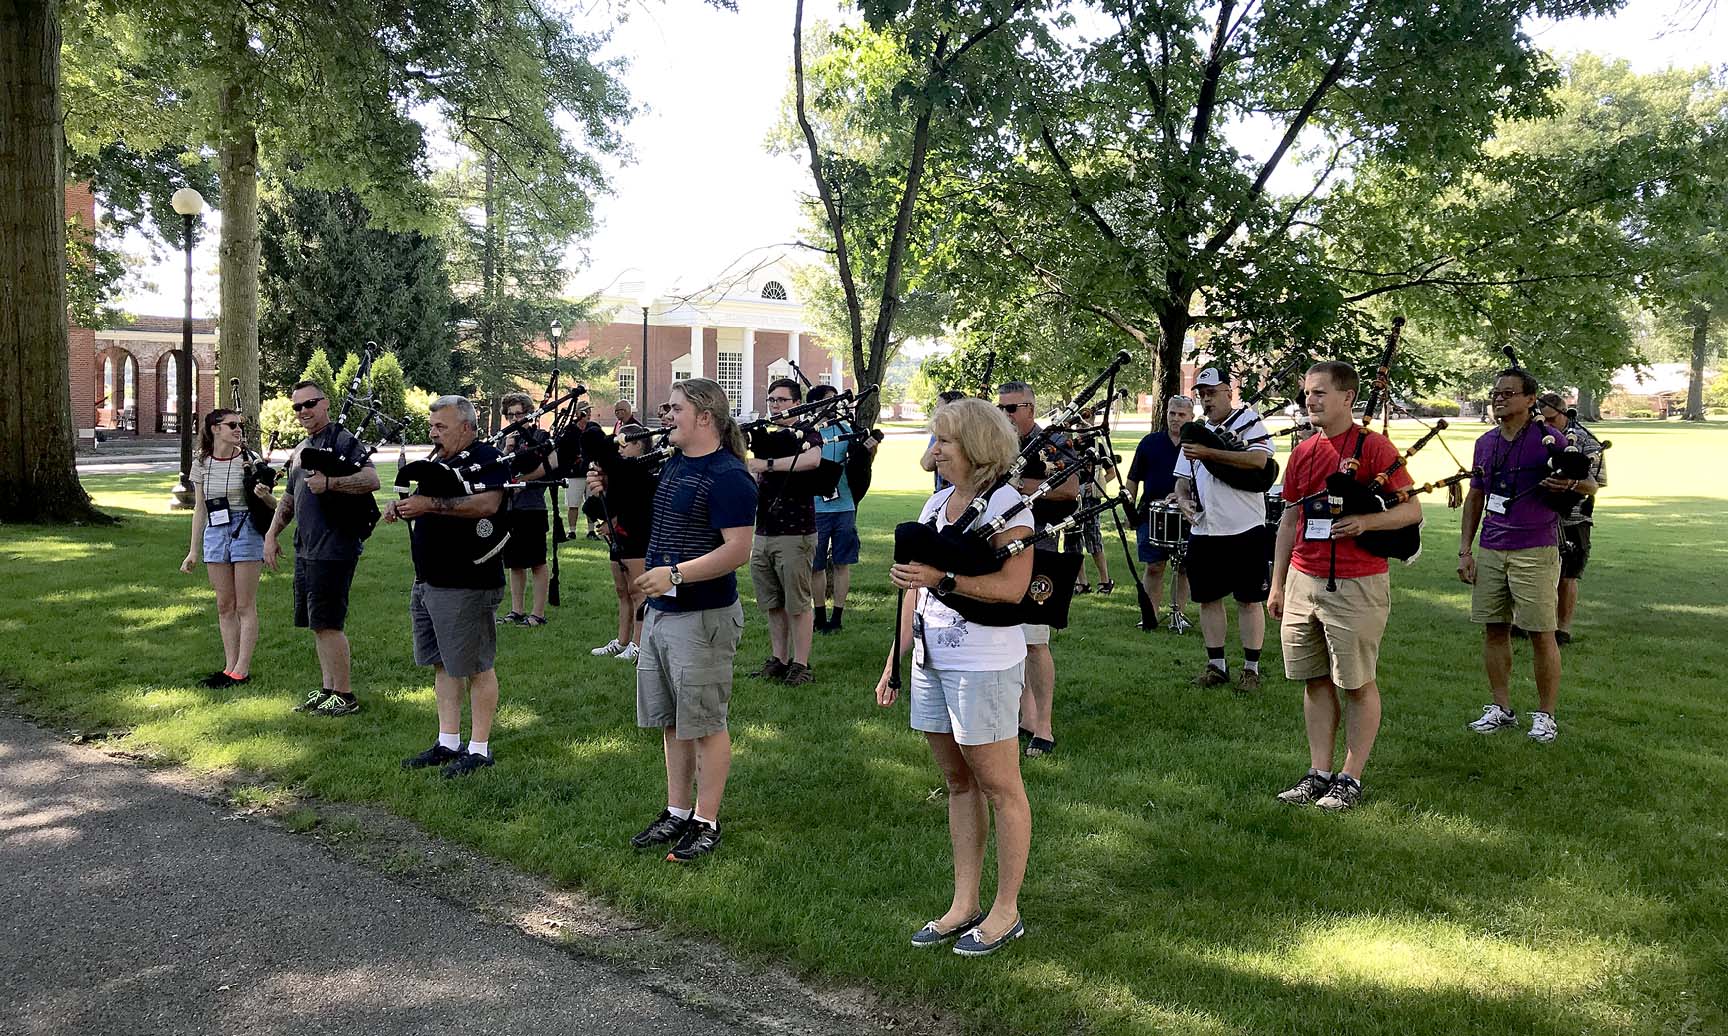 The Balmoral School of Piping & Drumming is happy to announce that we will provide matching funds to any recipient of an EUSPBA scholarship who chooses to use their scholarship to attend our 2023 summer schools.